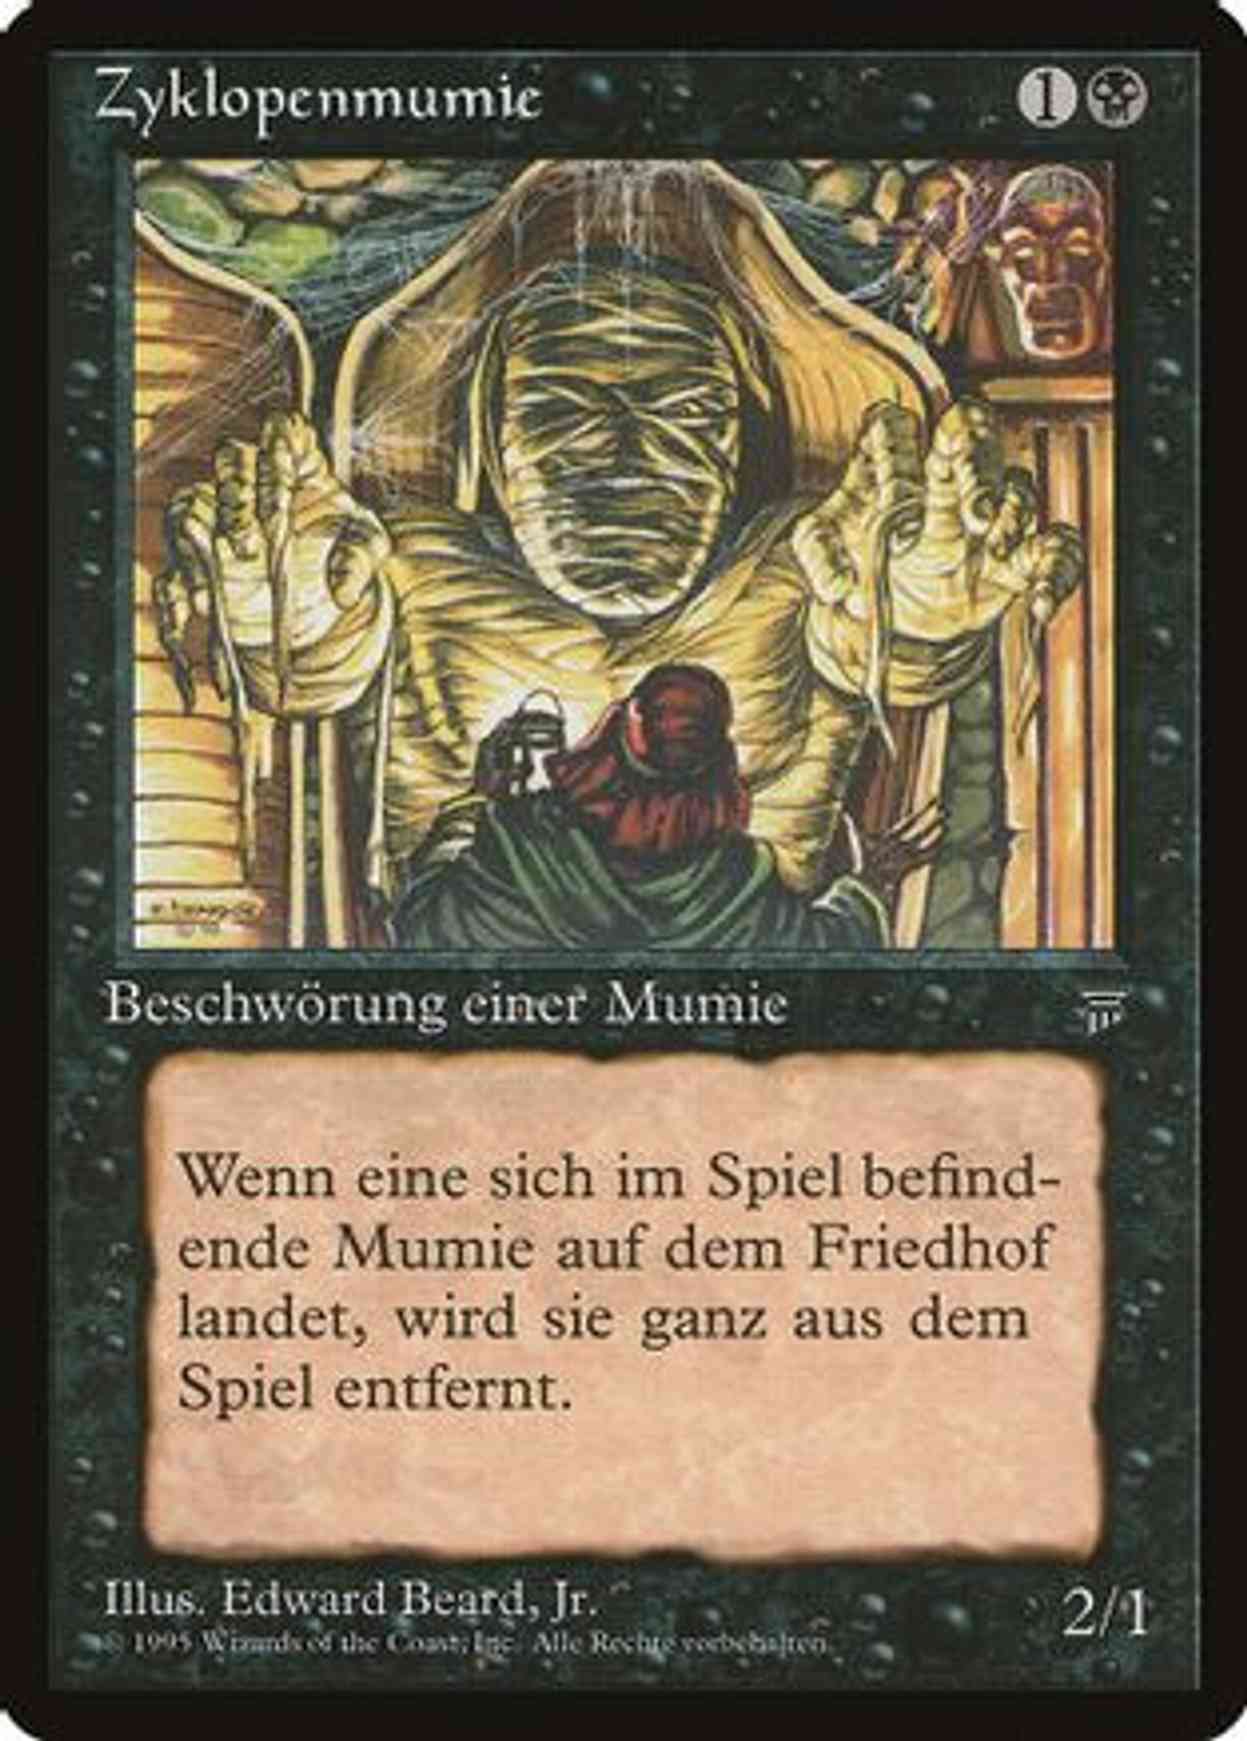 Cyclopean Mummy (German) - "Zyklopenmumie" magic card front